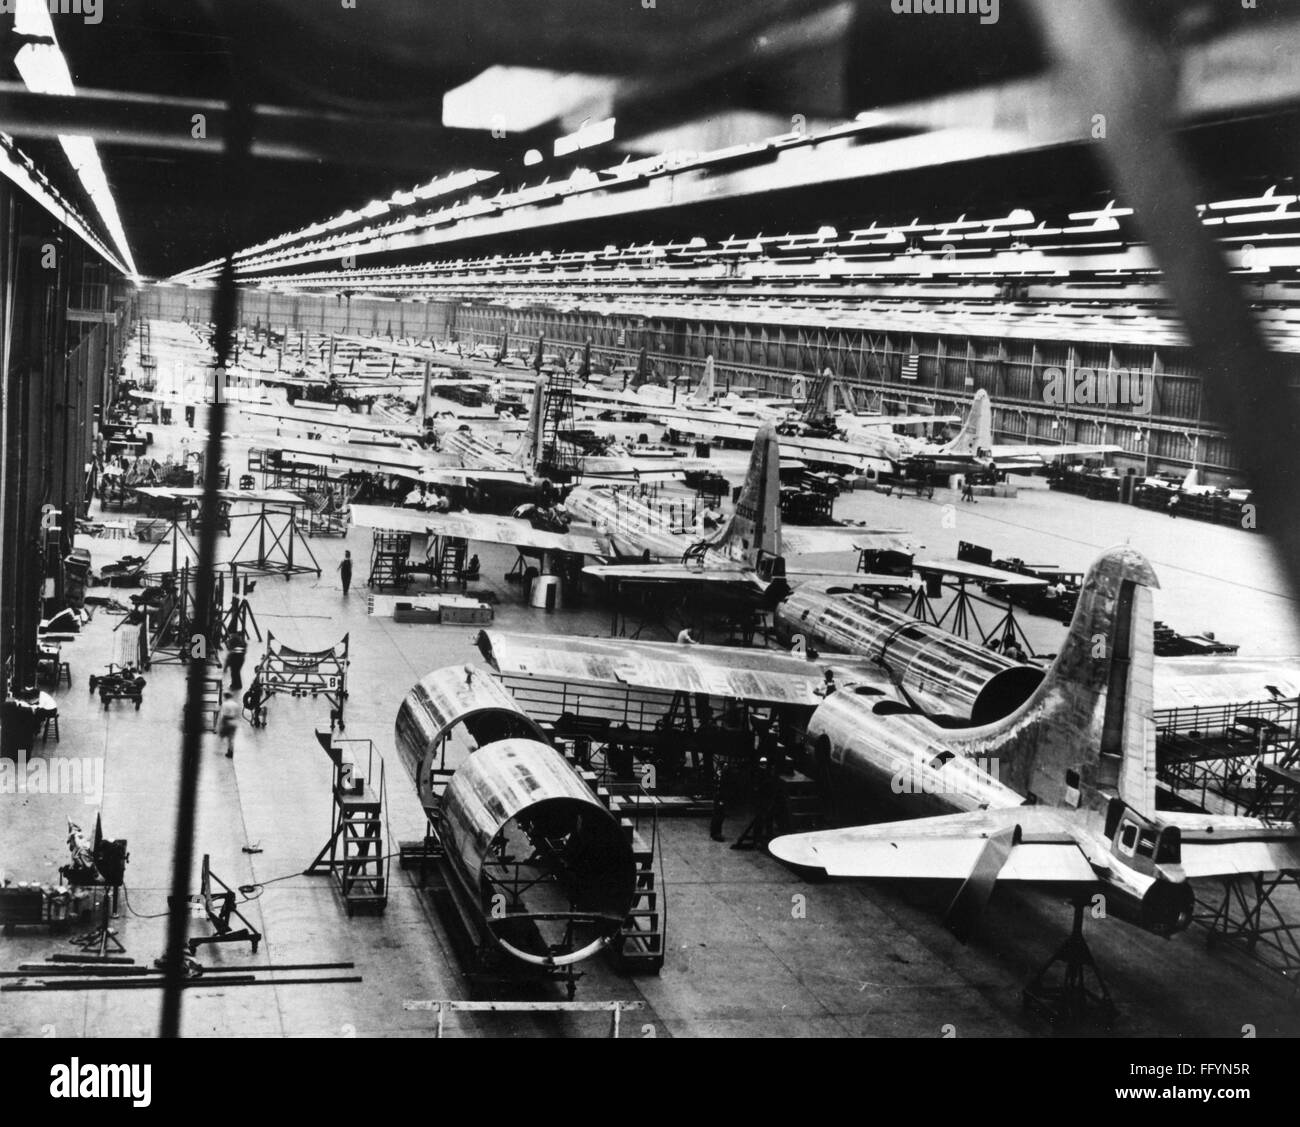 BOEING B-29 FACTORY, c1945. /nAssembly room for the Boeing B-29 Superfortress, built for the U.S. Air Force. Photograph, c1945. Stock Photo